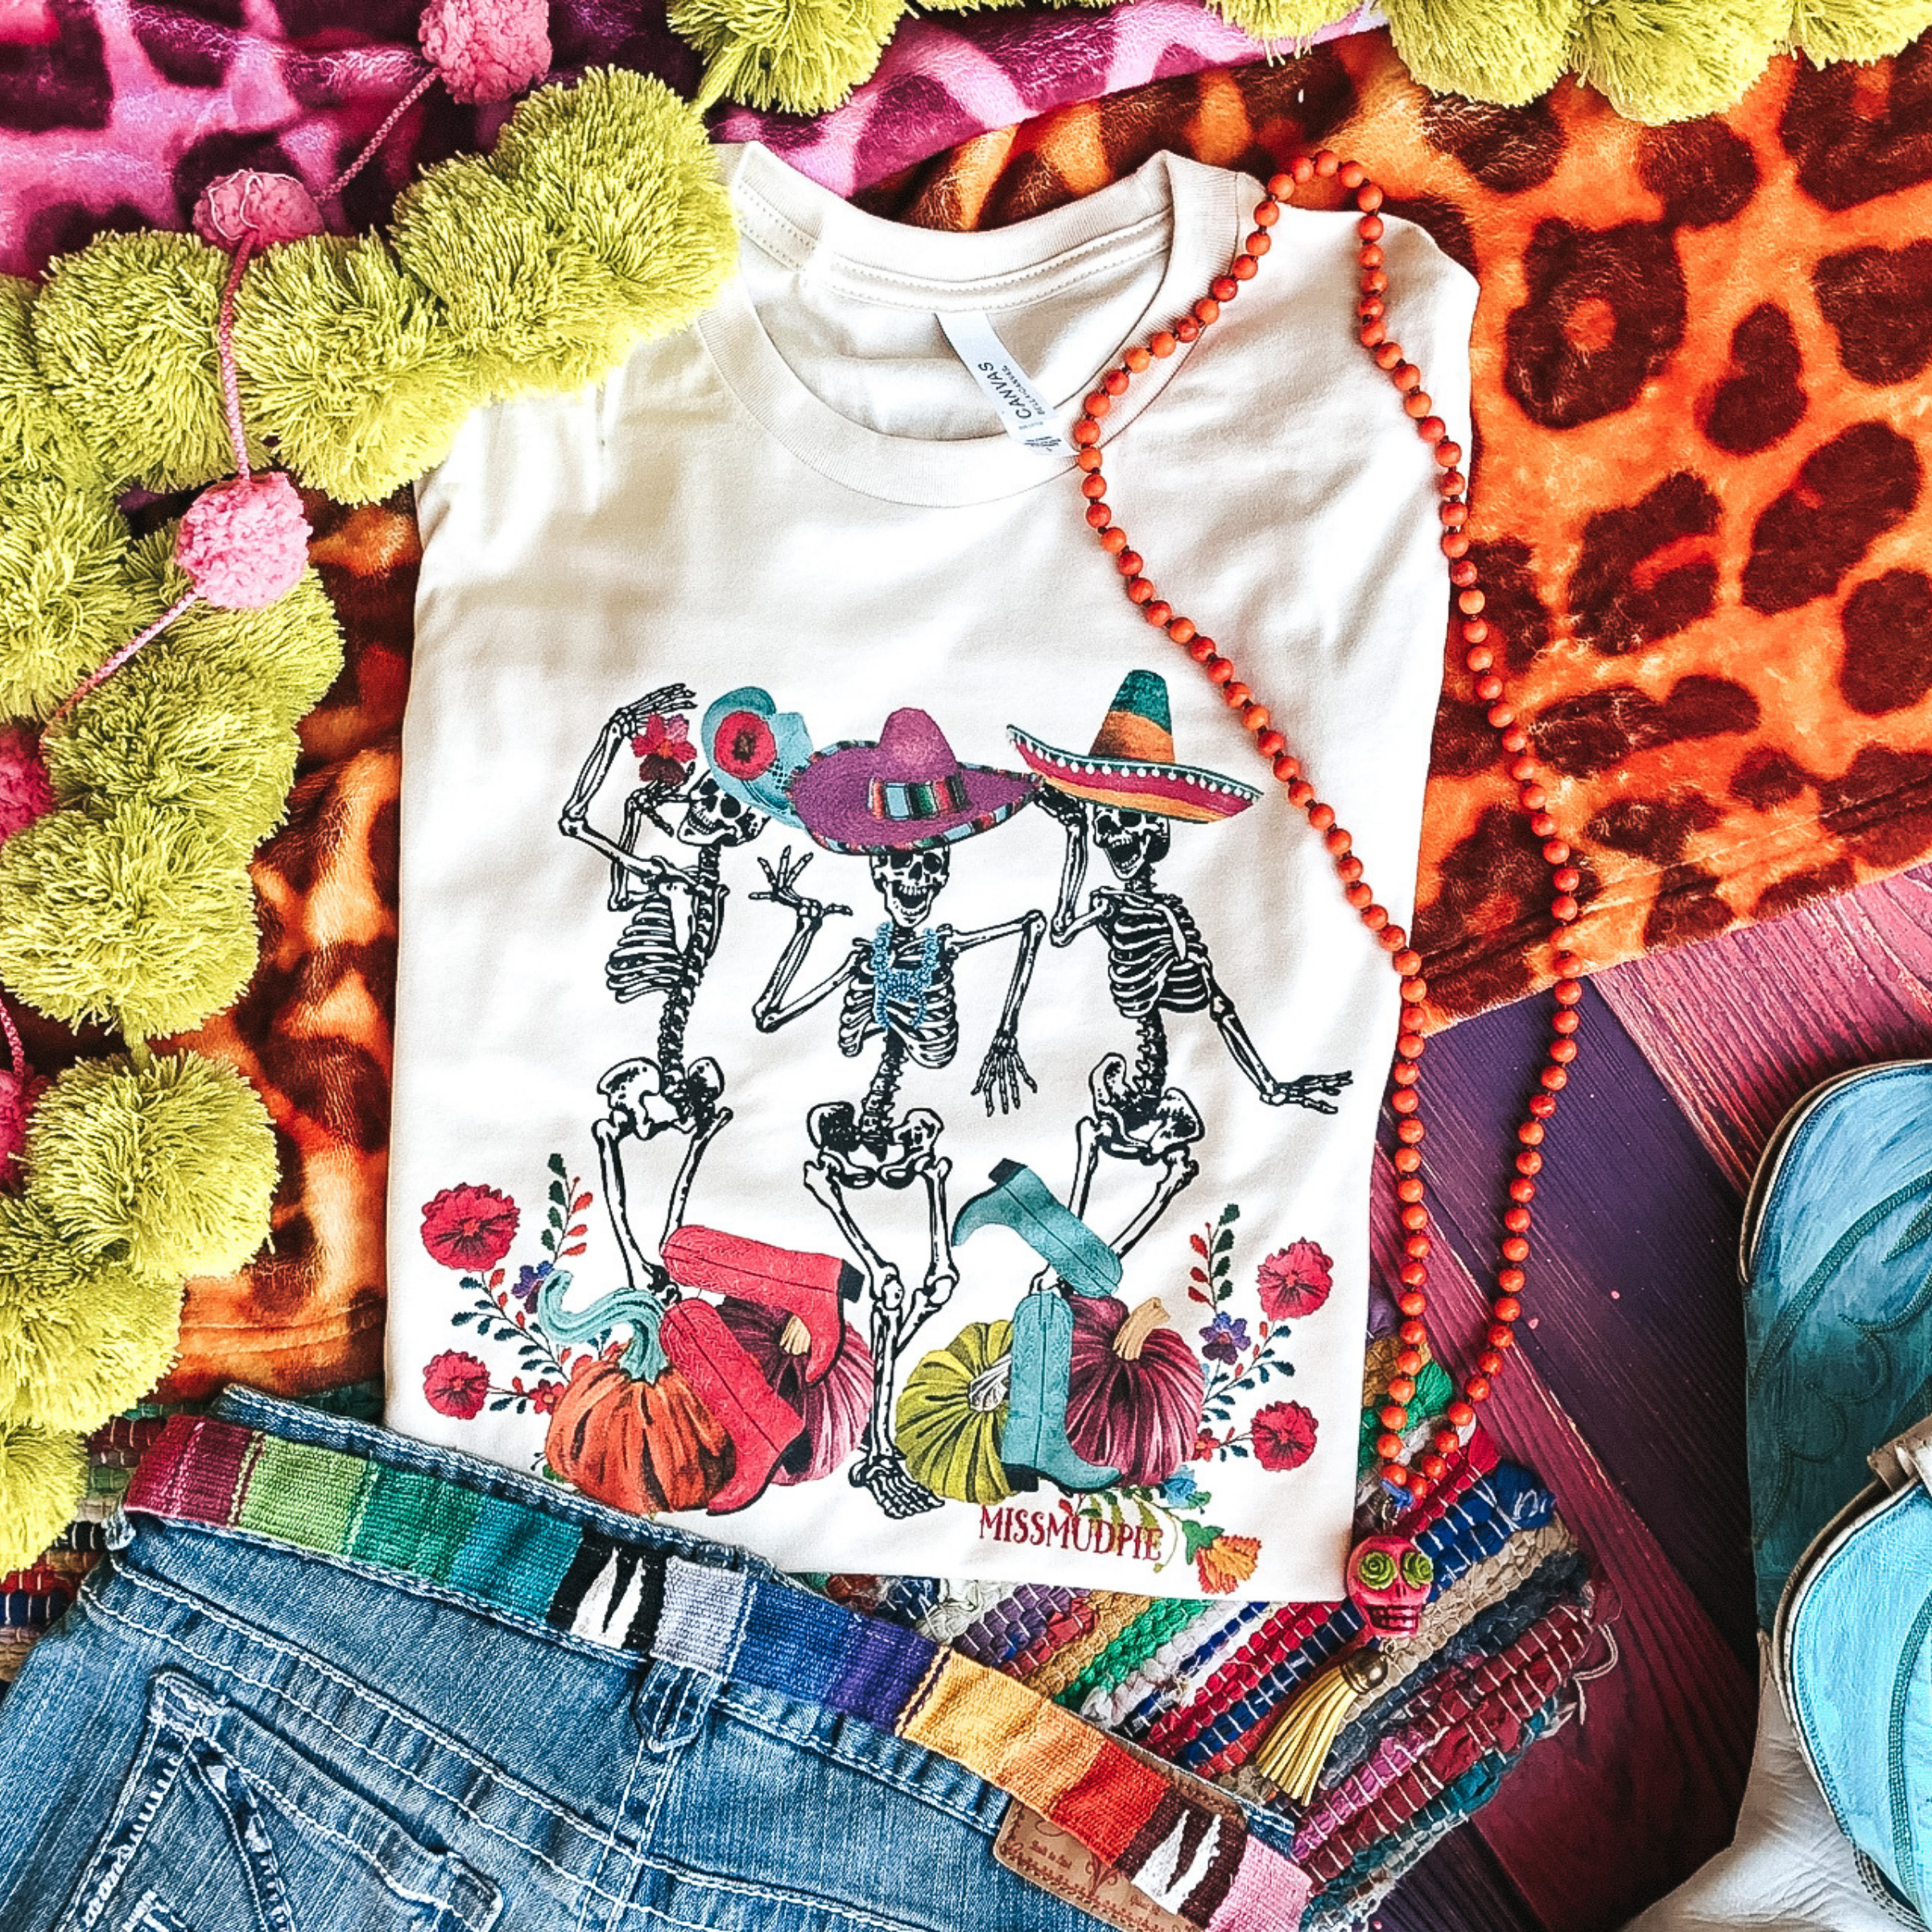 This is a cream shirt with 3 mariachi skeletons. Two out of the three skeletons are wearing sombreros and the other skeleton is wearing a hat with a flower on it. Two skeletons also have a pair of pink cowgirl boots and a pair of blue cowgirl boots. At the bottom of the shirt there are also colorful pumpkins and flowers.   